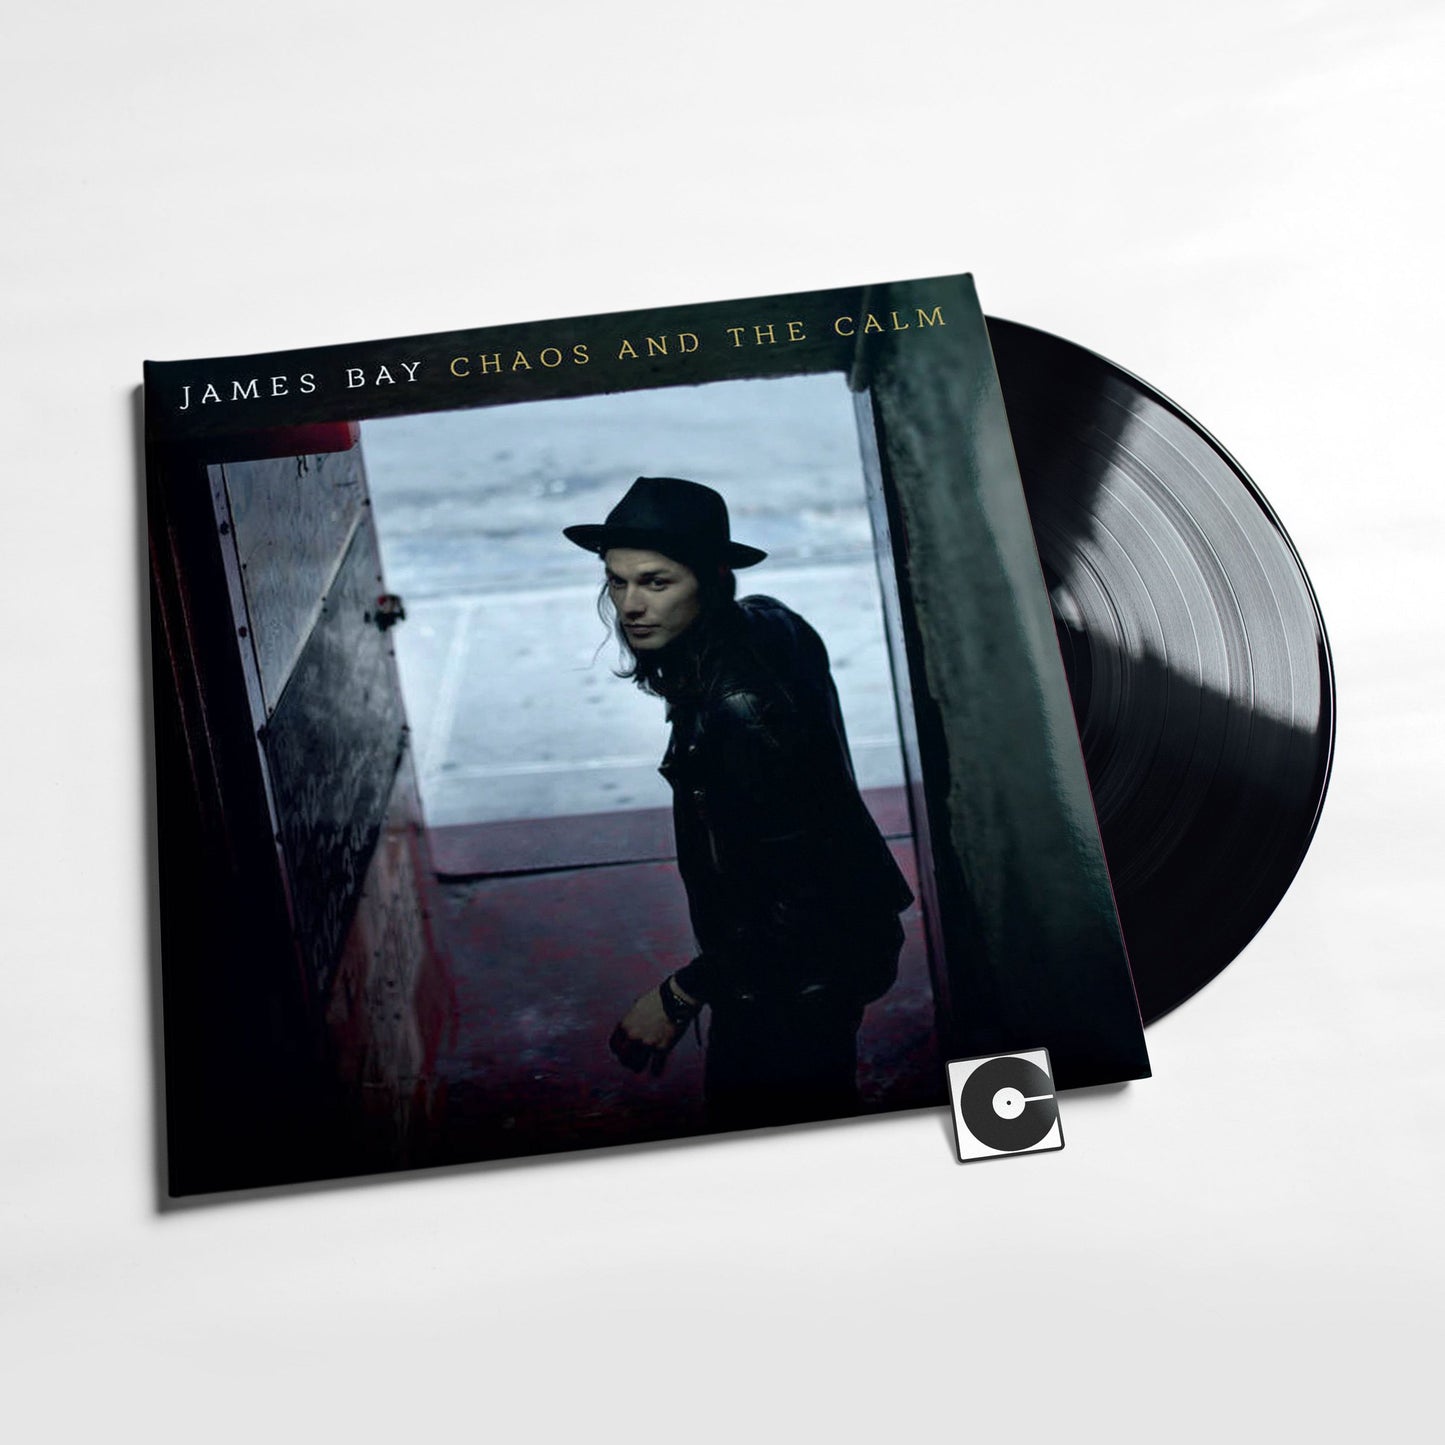 James Bay - "Chaos And The Calm"